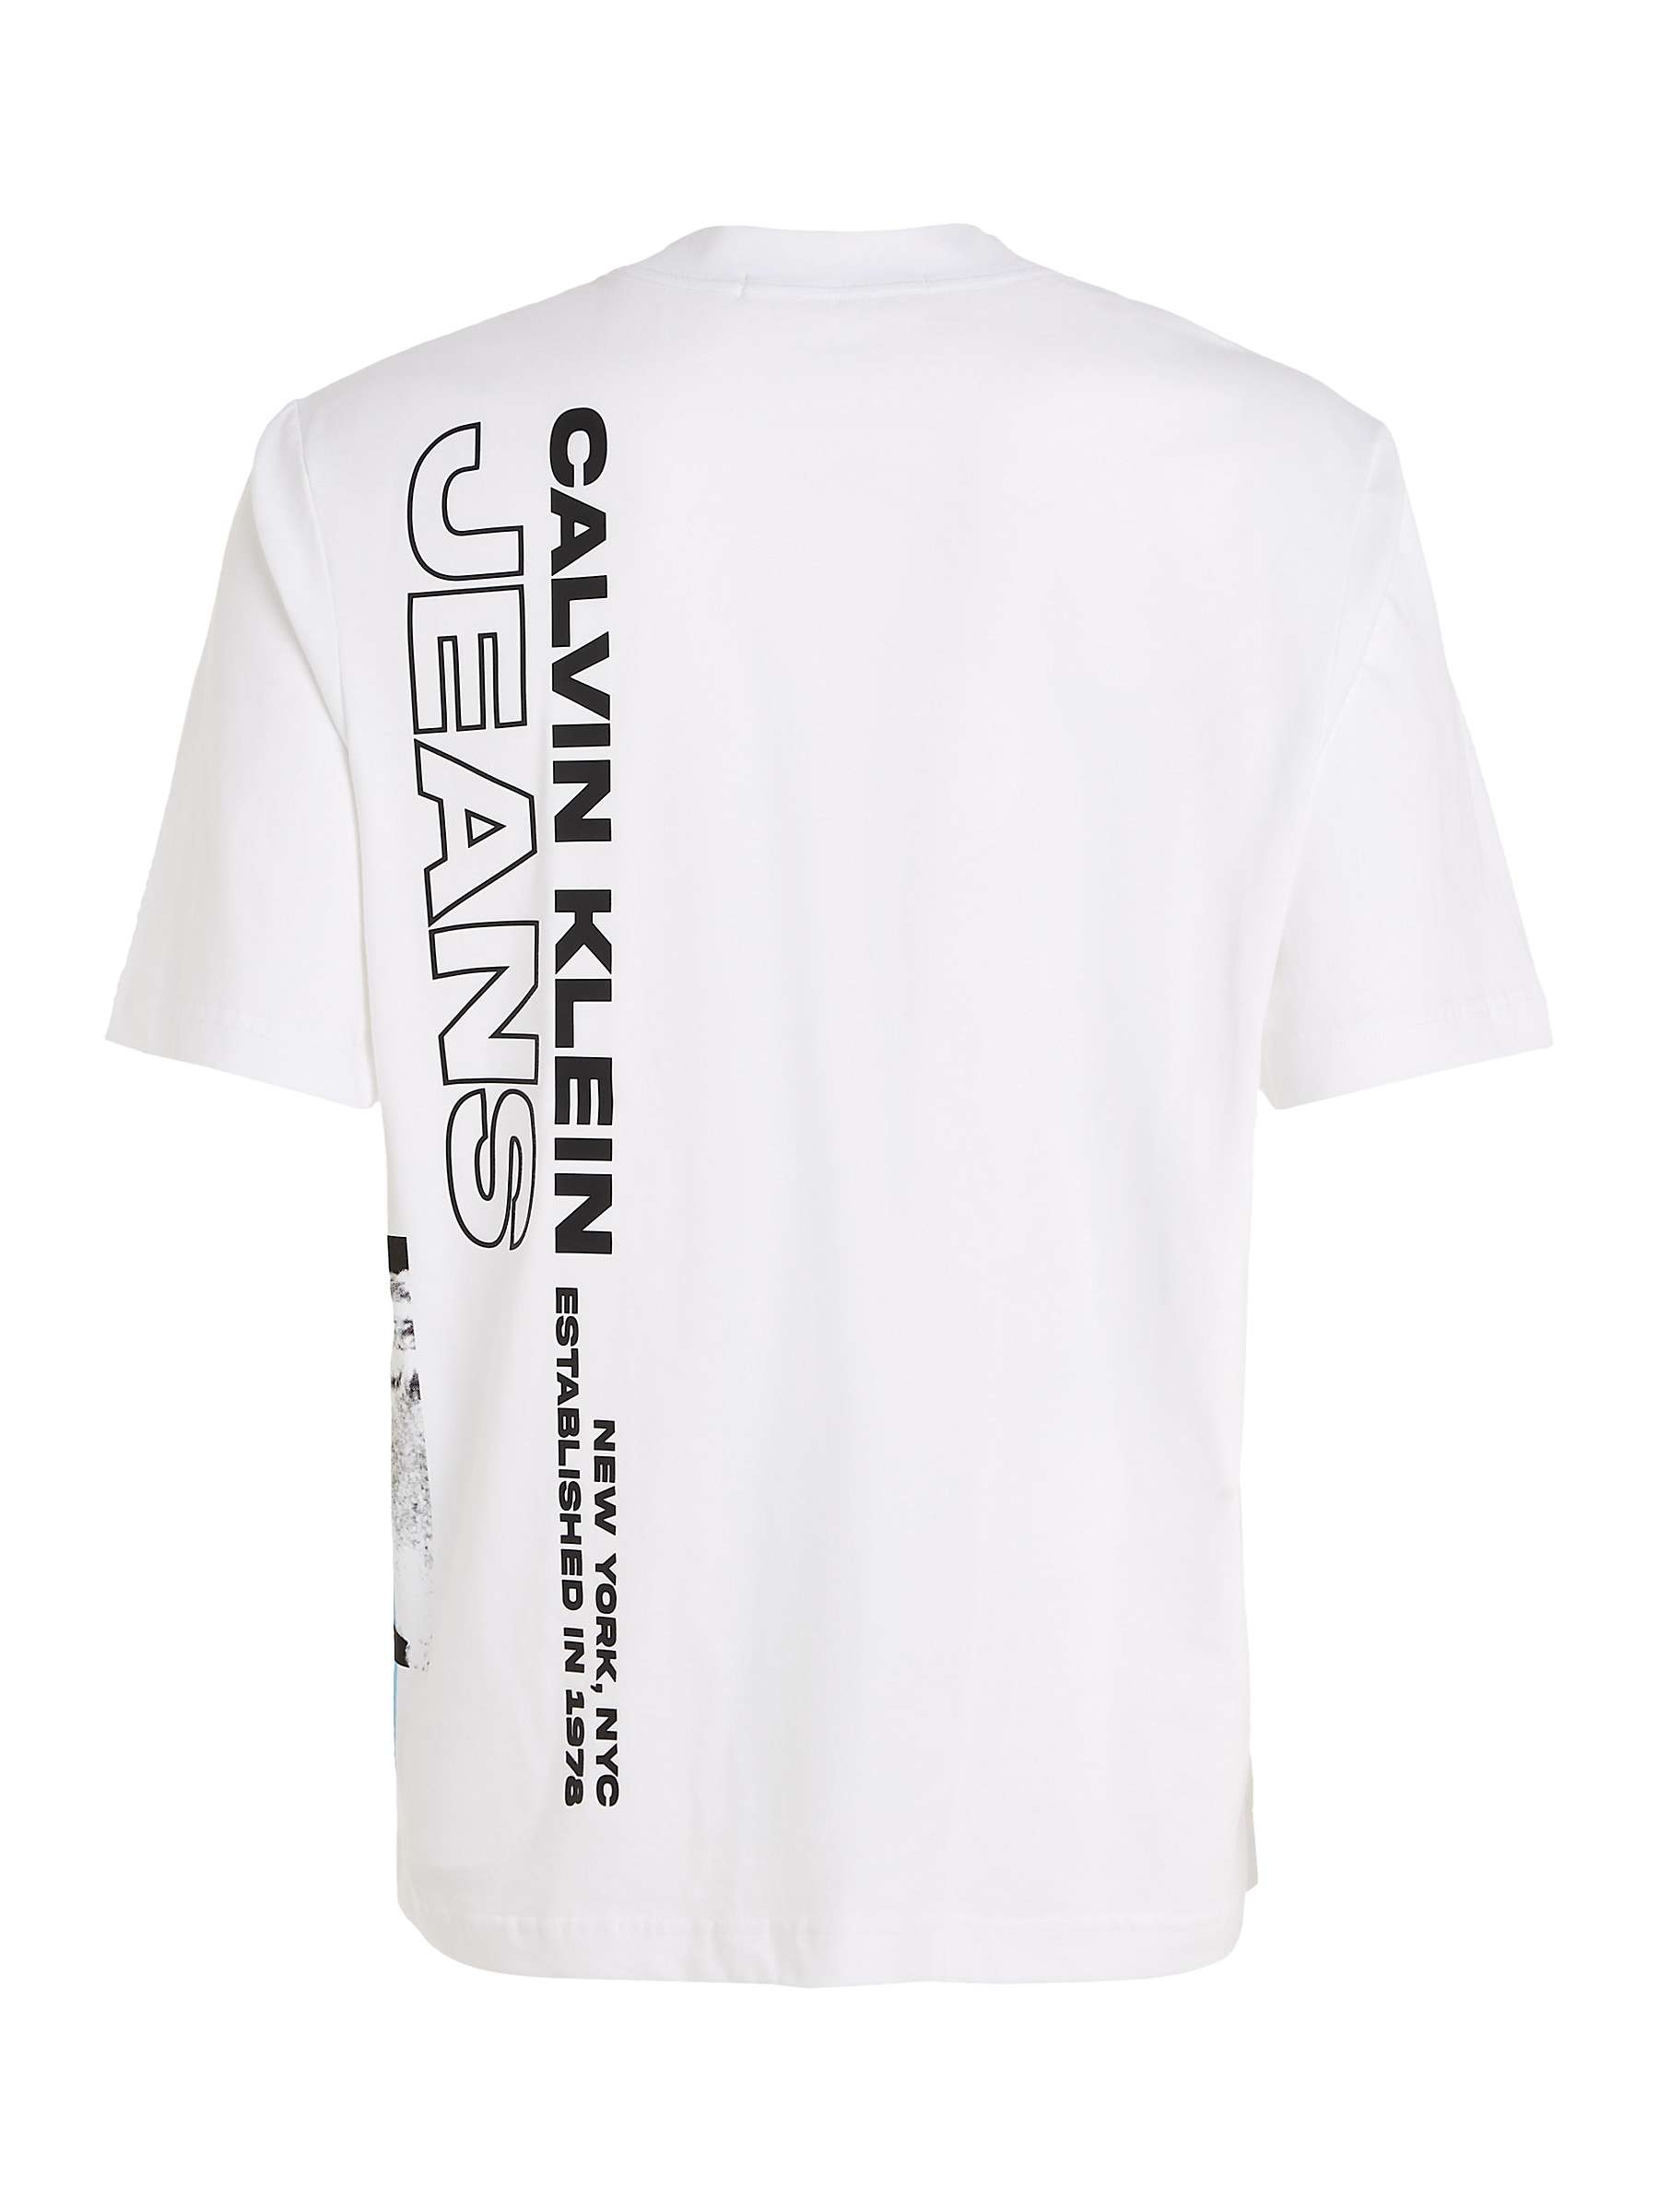 Buy Calvin Klein Jeans NYC Print T-Shirt, Bright White Online at johnlewis.com